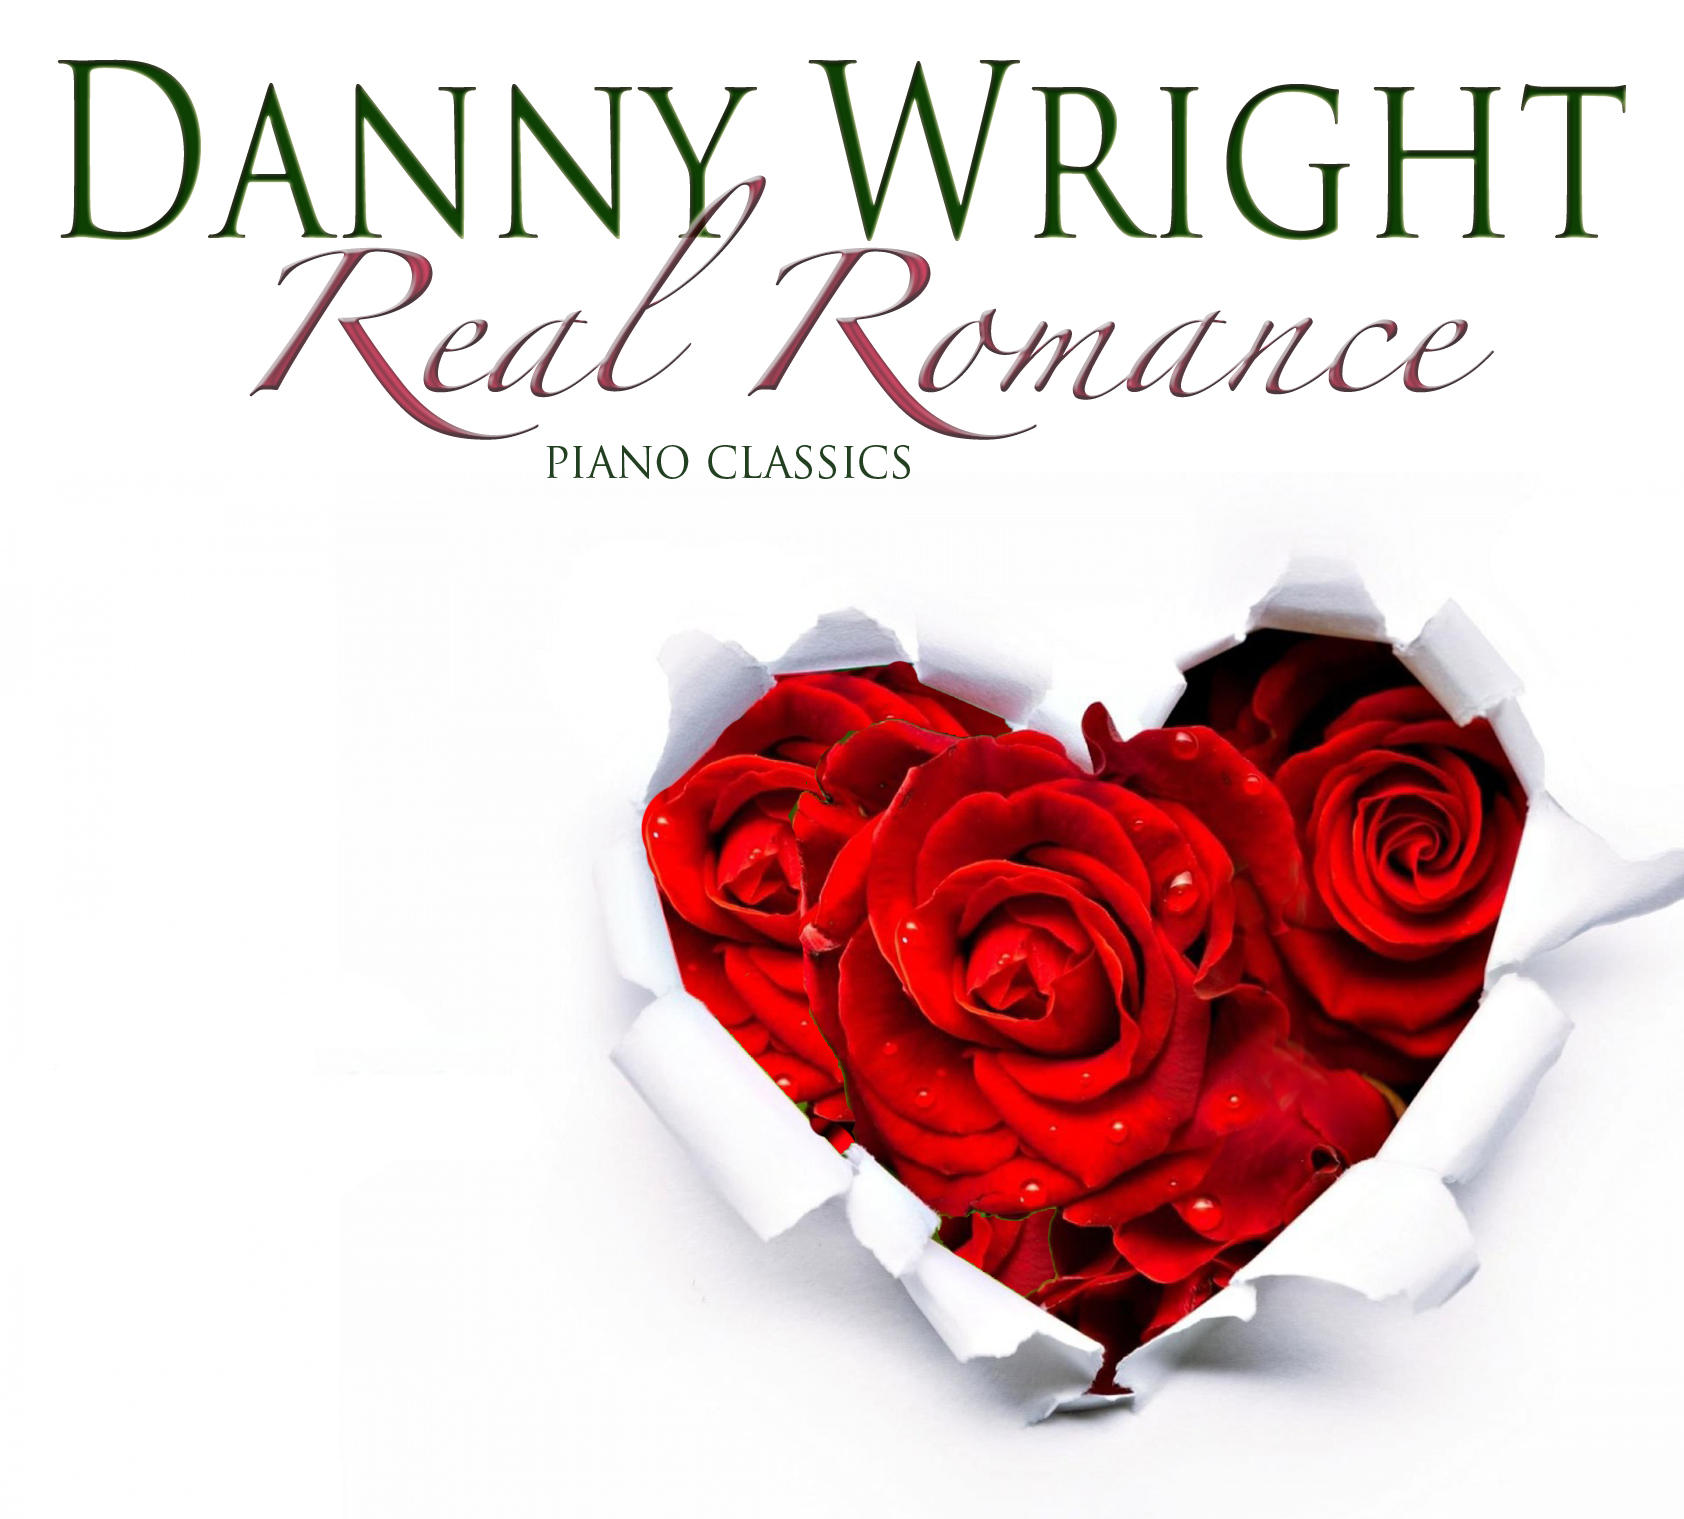 Real Romance by Danny Wright